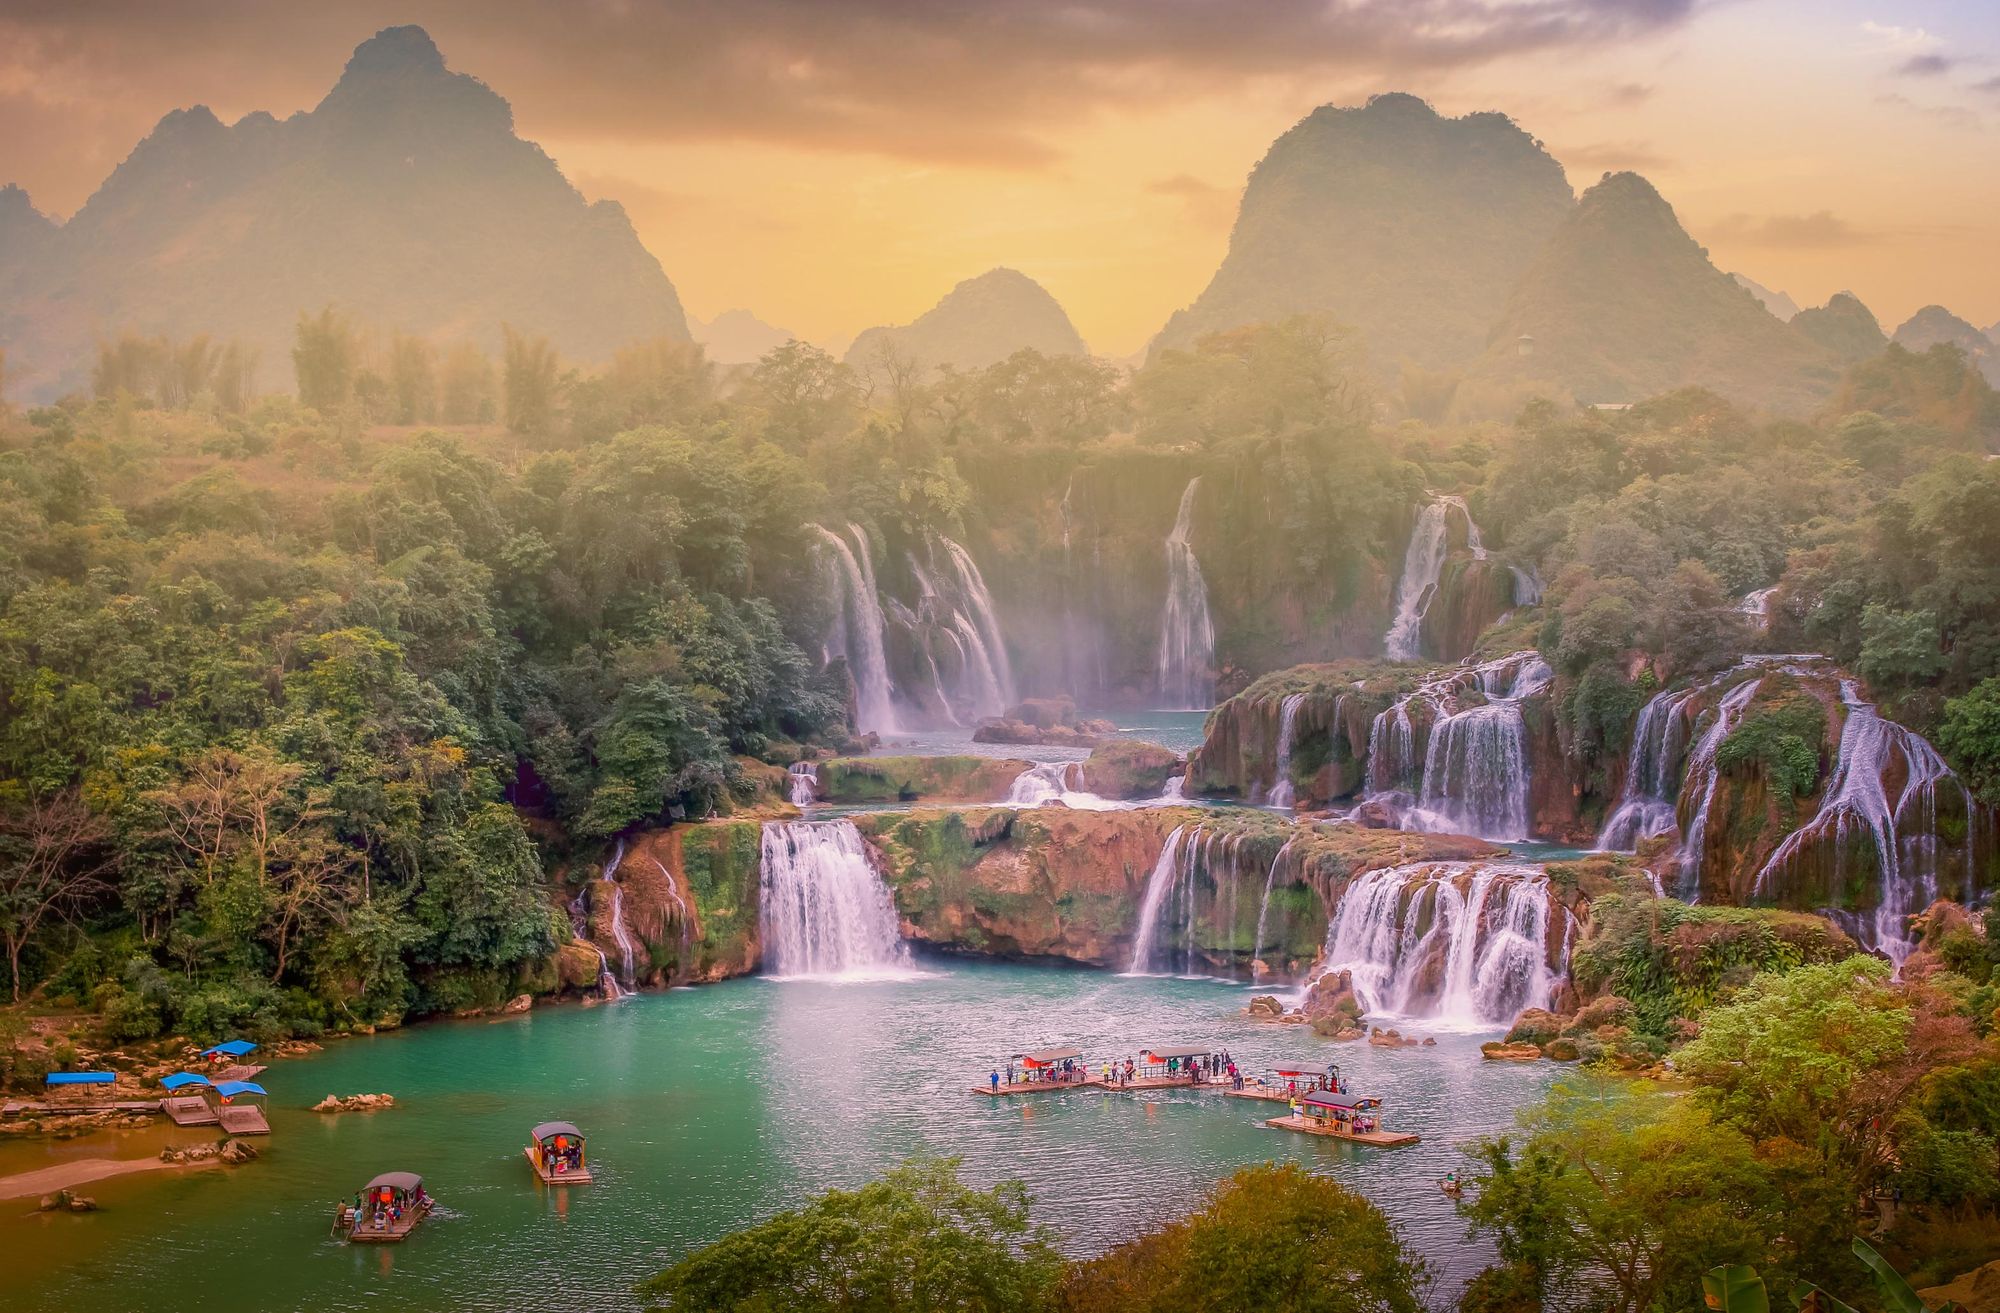 The remarkable Bản Giốc Waterfall in Vietnam. Photo: Getty